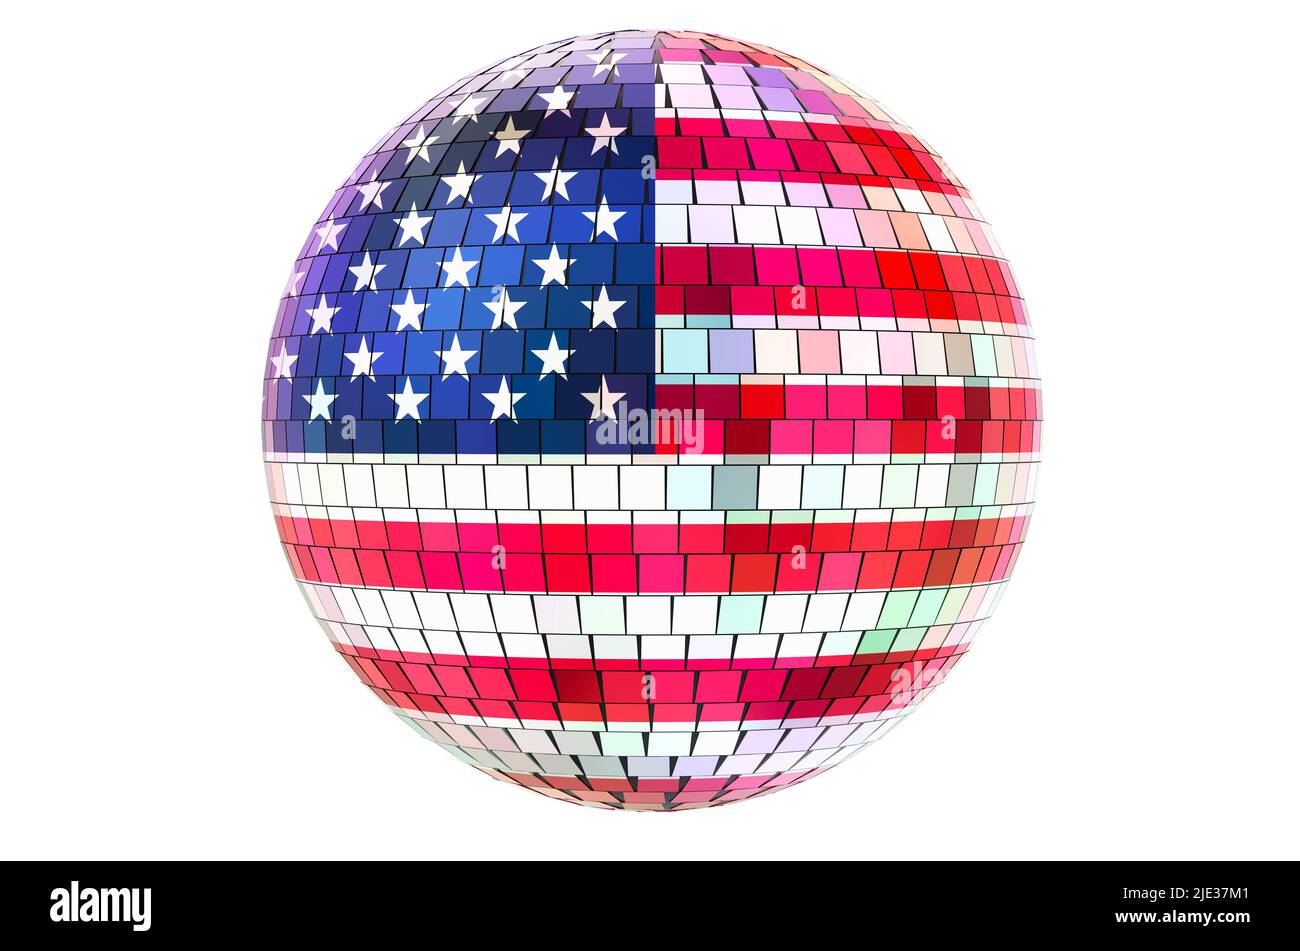 Mirror disco ball with the United States flag, 3D rendering isolated on white background Stock Photo